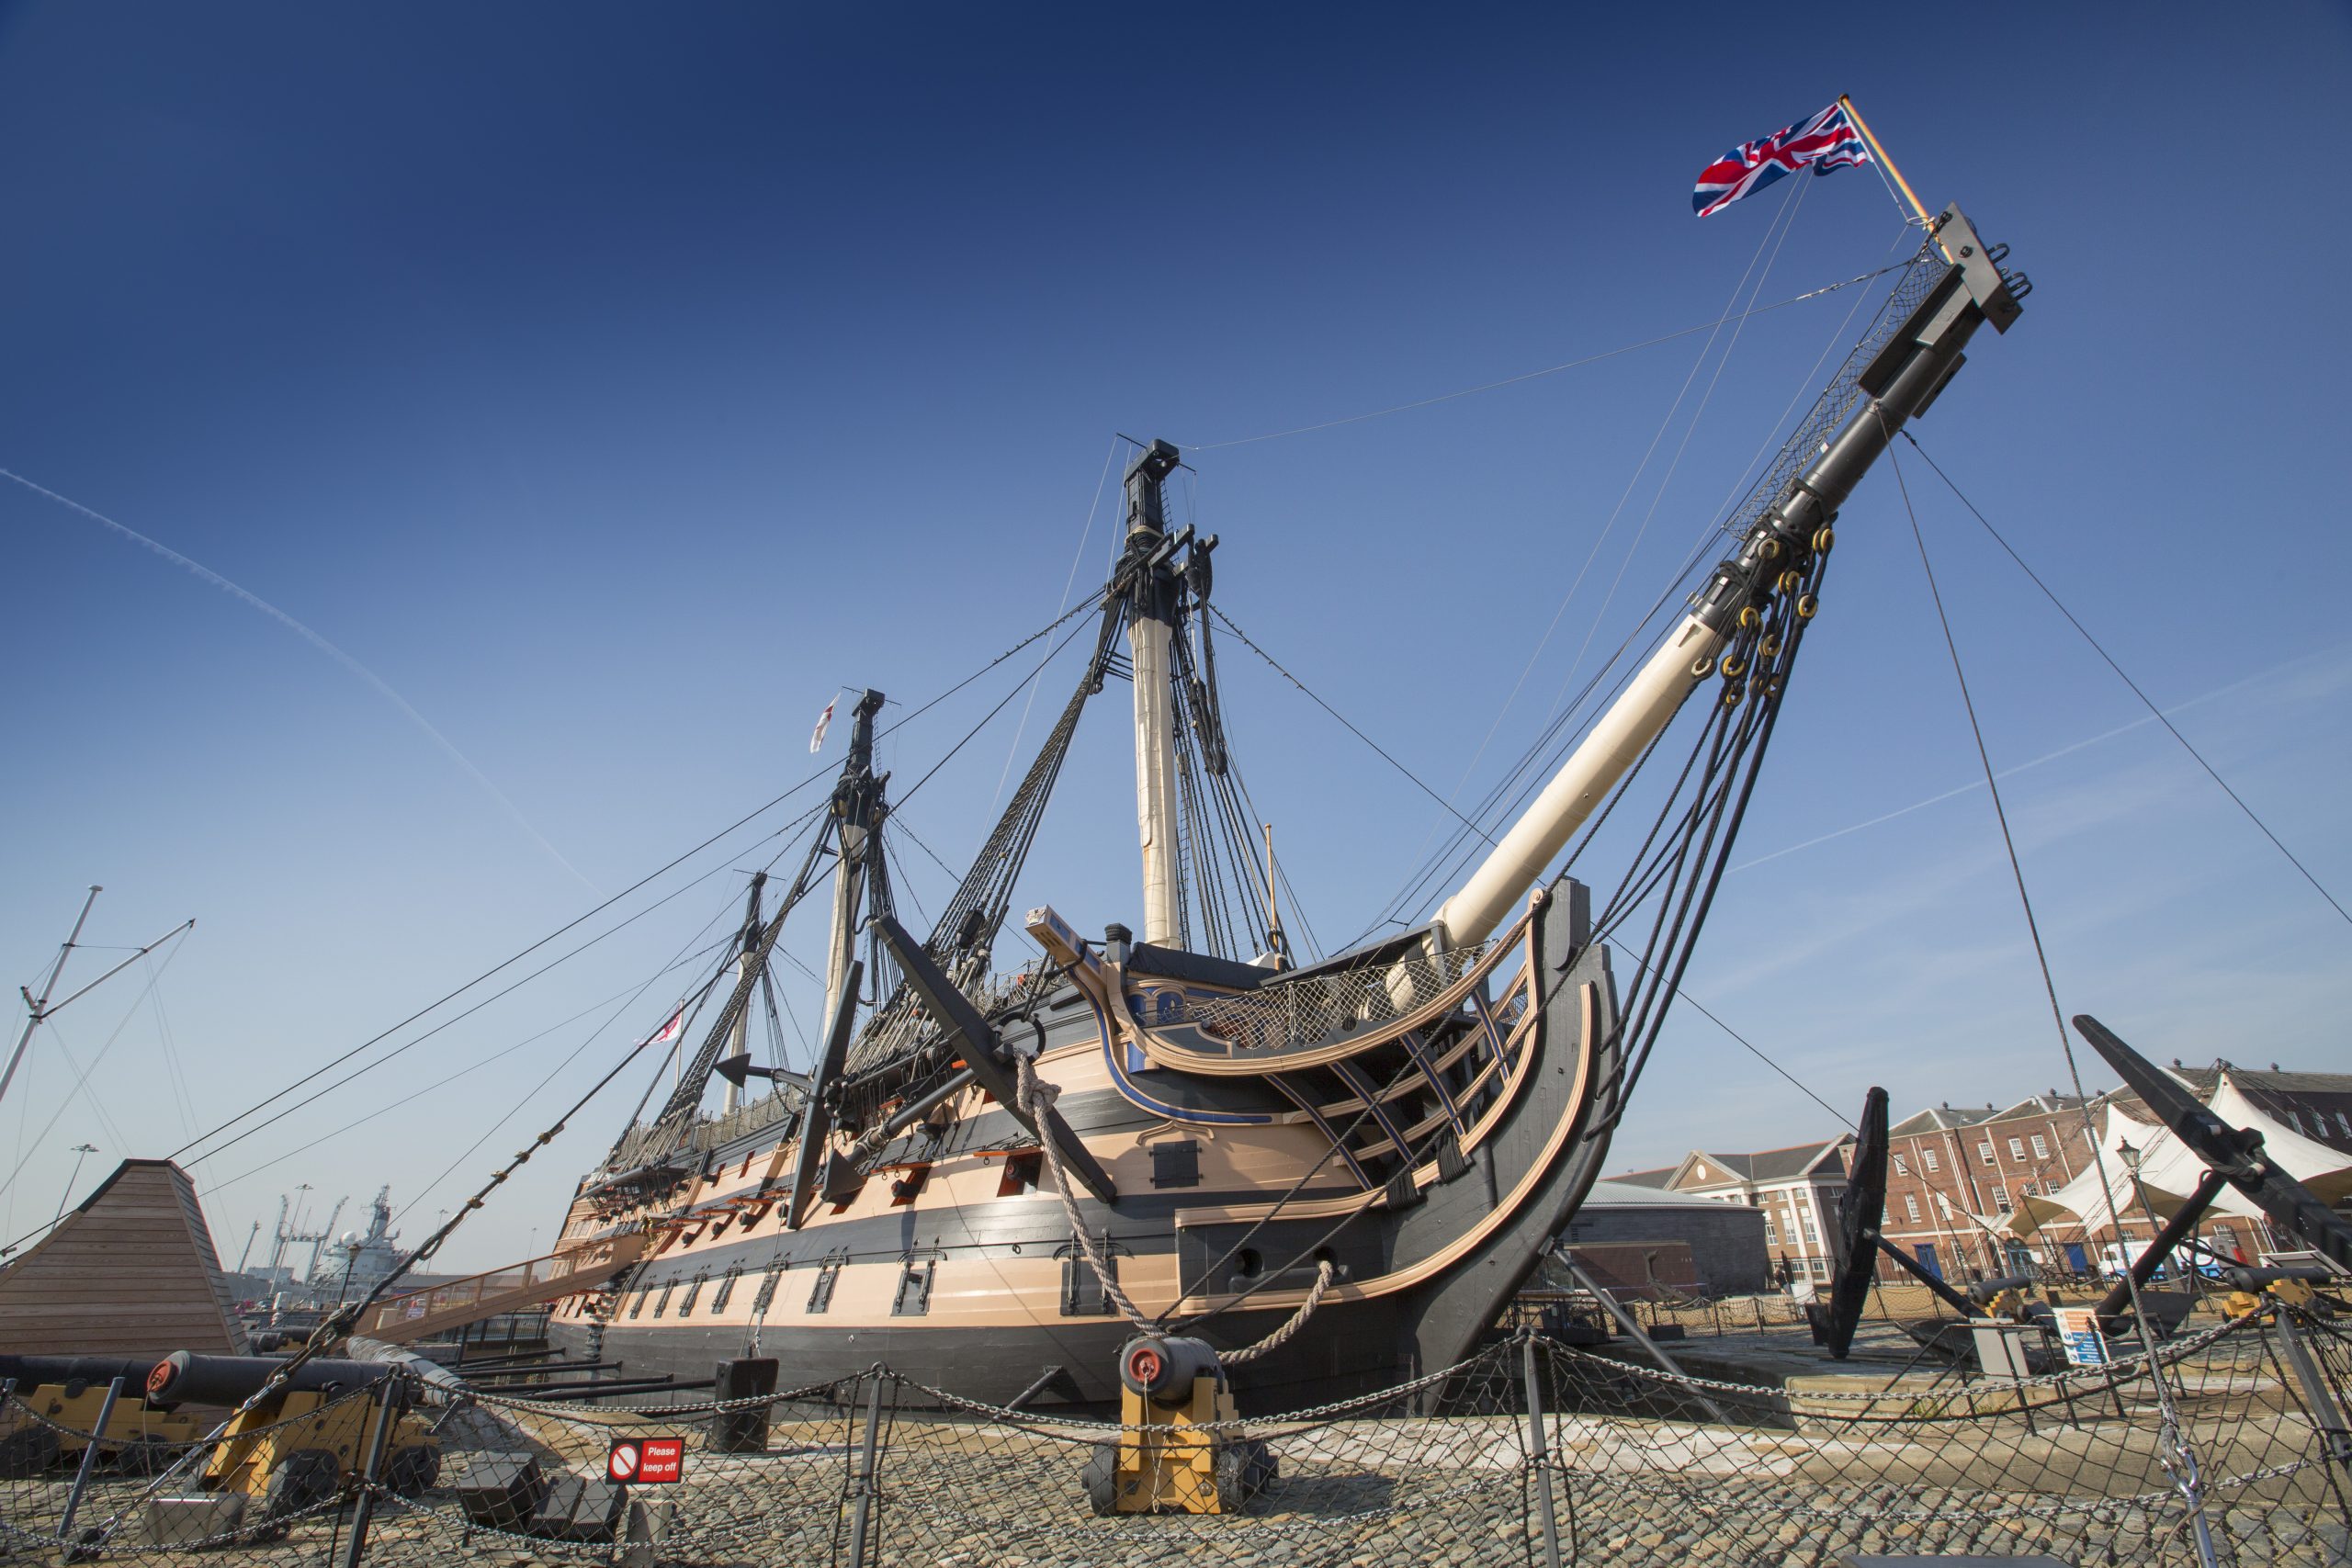 HMS Victory, The National Museum of The Royal Navy, The Mary Rose, Portsmouth Historic Dockyard, museum